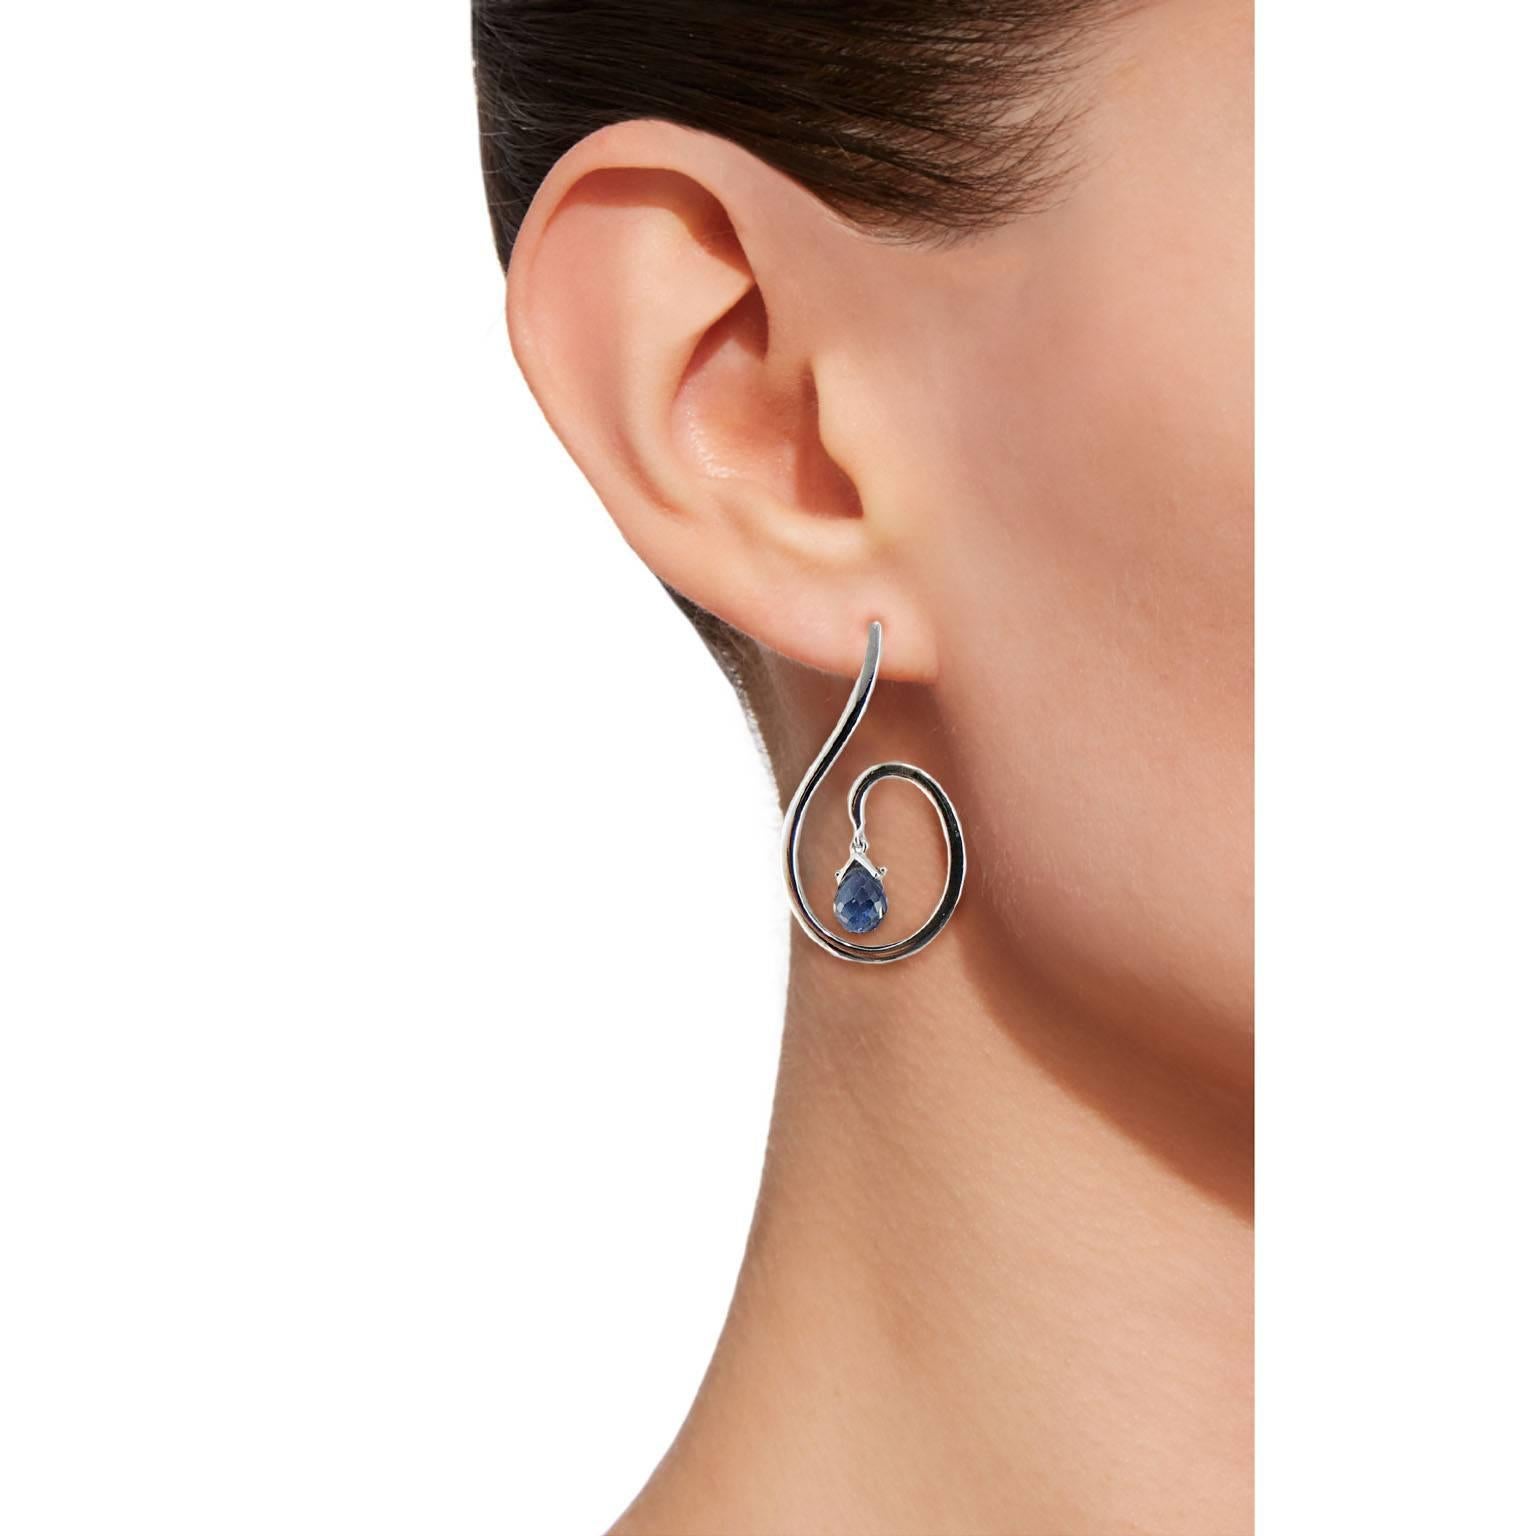 Jona design collection, hand crafted in Italy, 18 karat white gold dangle earrings featuring 7.61 carats of blue sapphires briolette drops.
All Jona jewelry is new and has never been previously owned or worn. Each item will arrive at your door